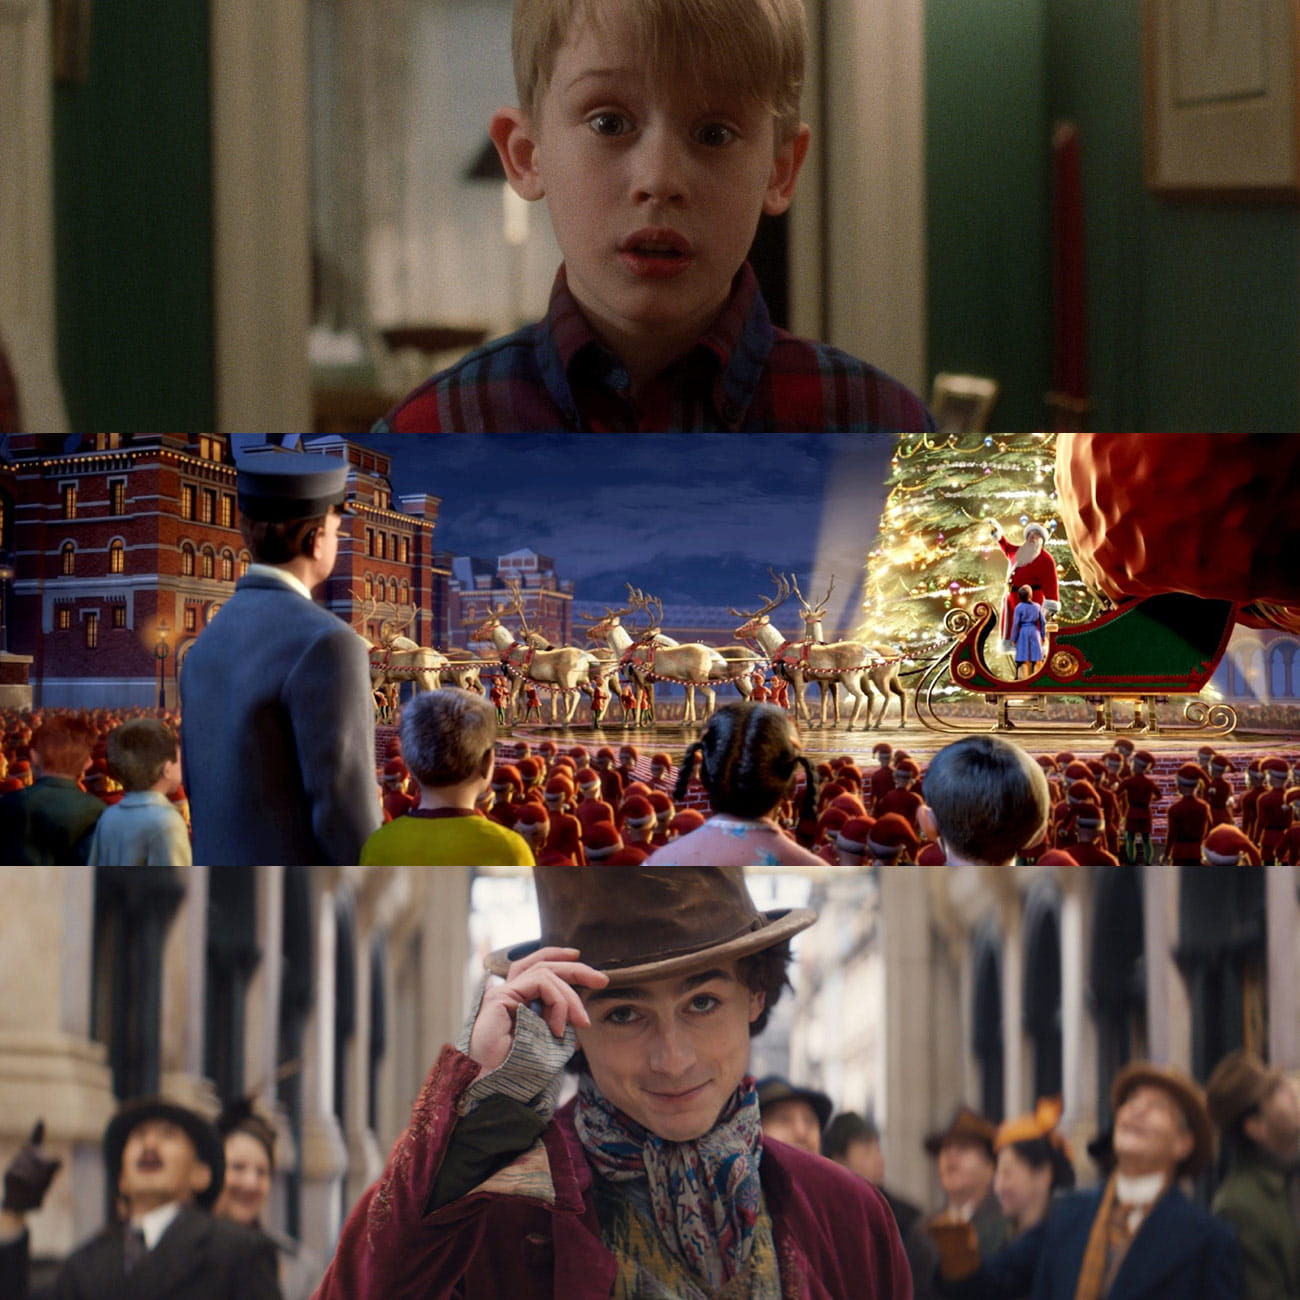 A collage of classic Christmas movies